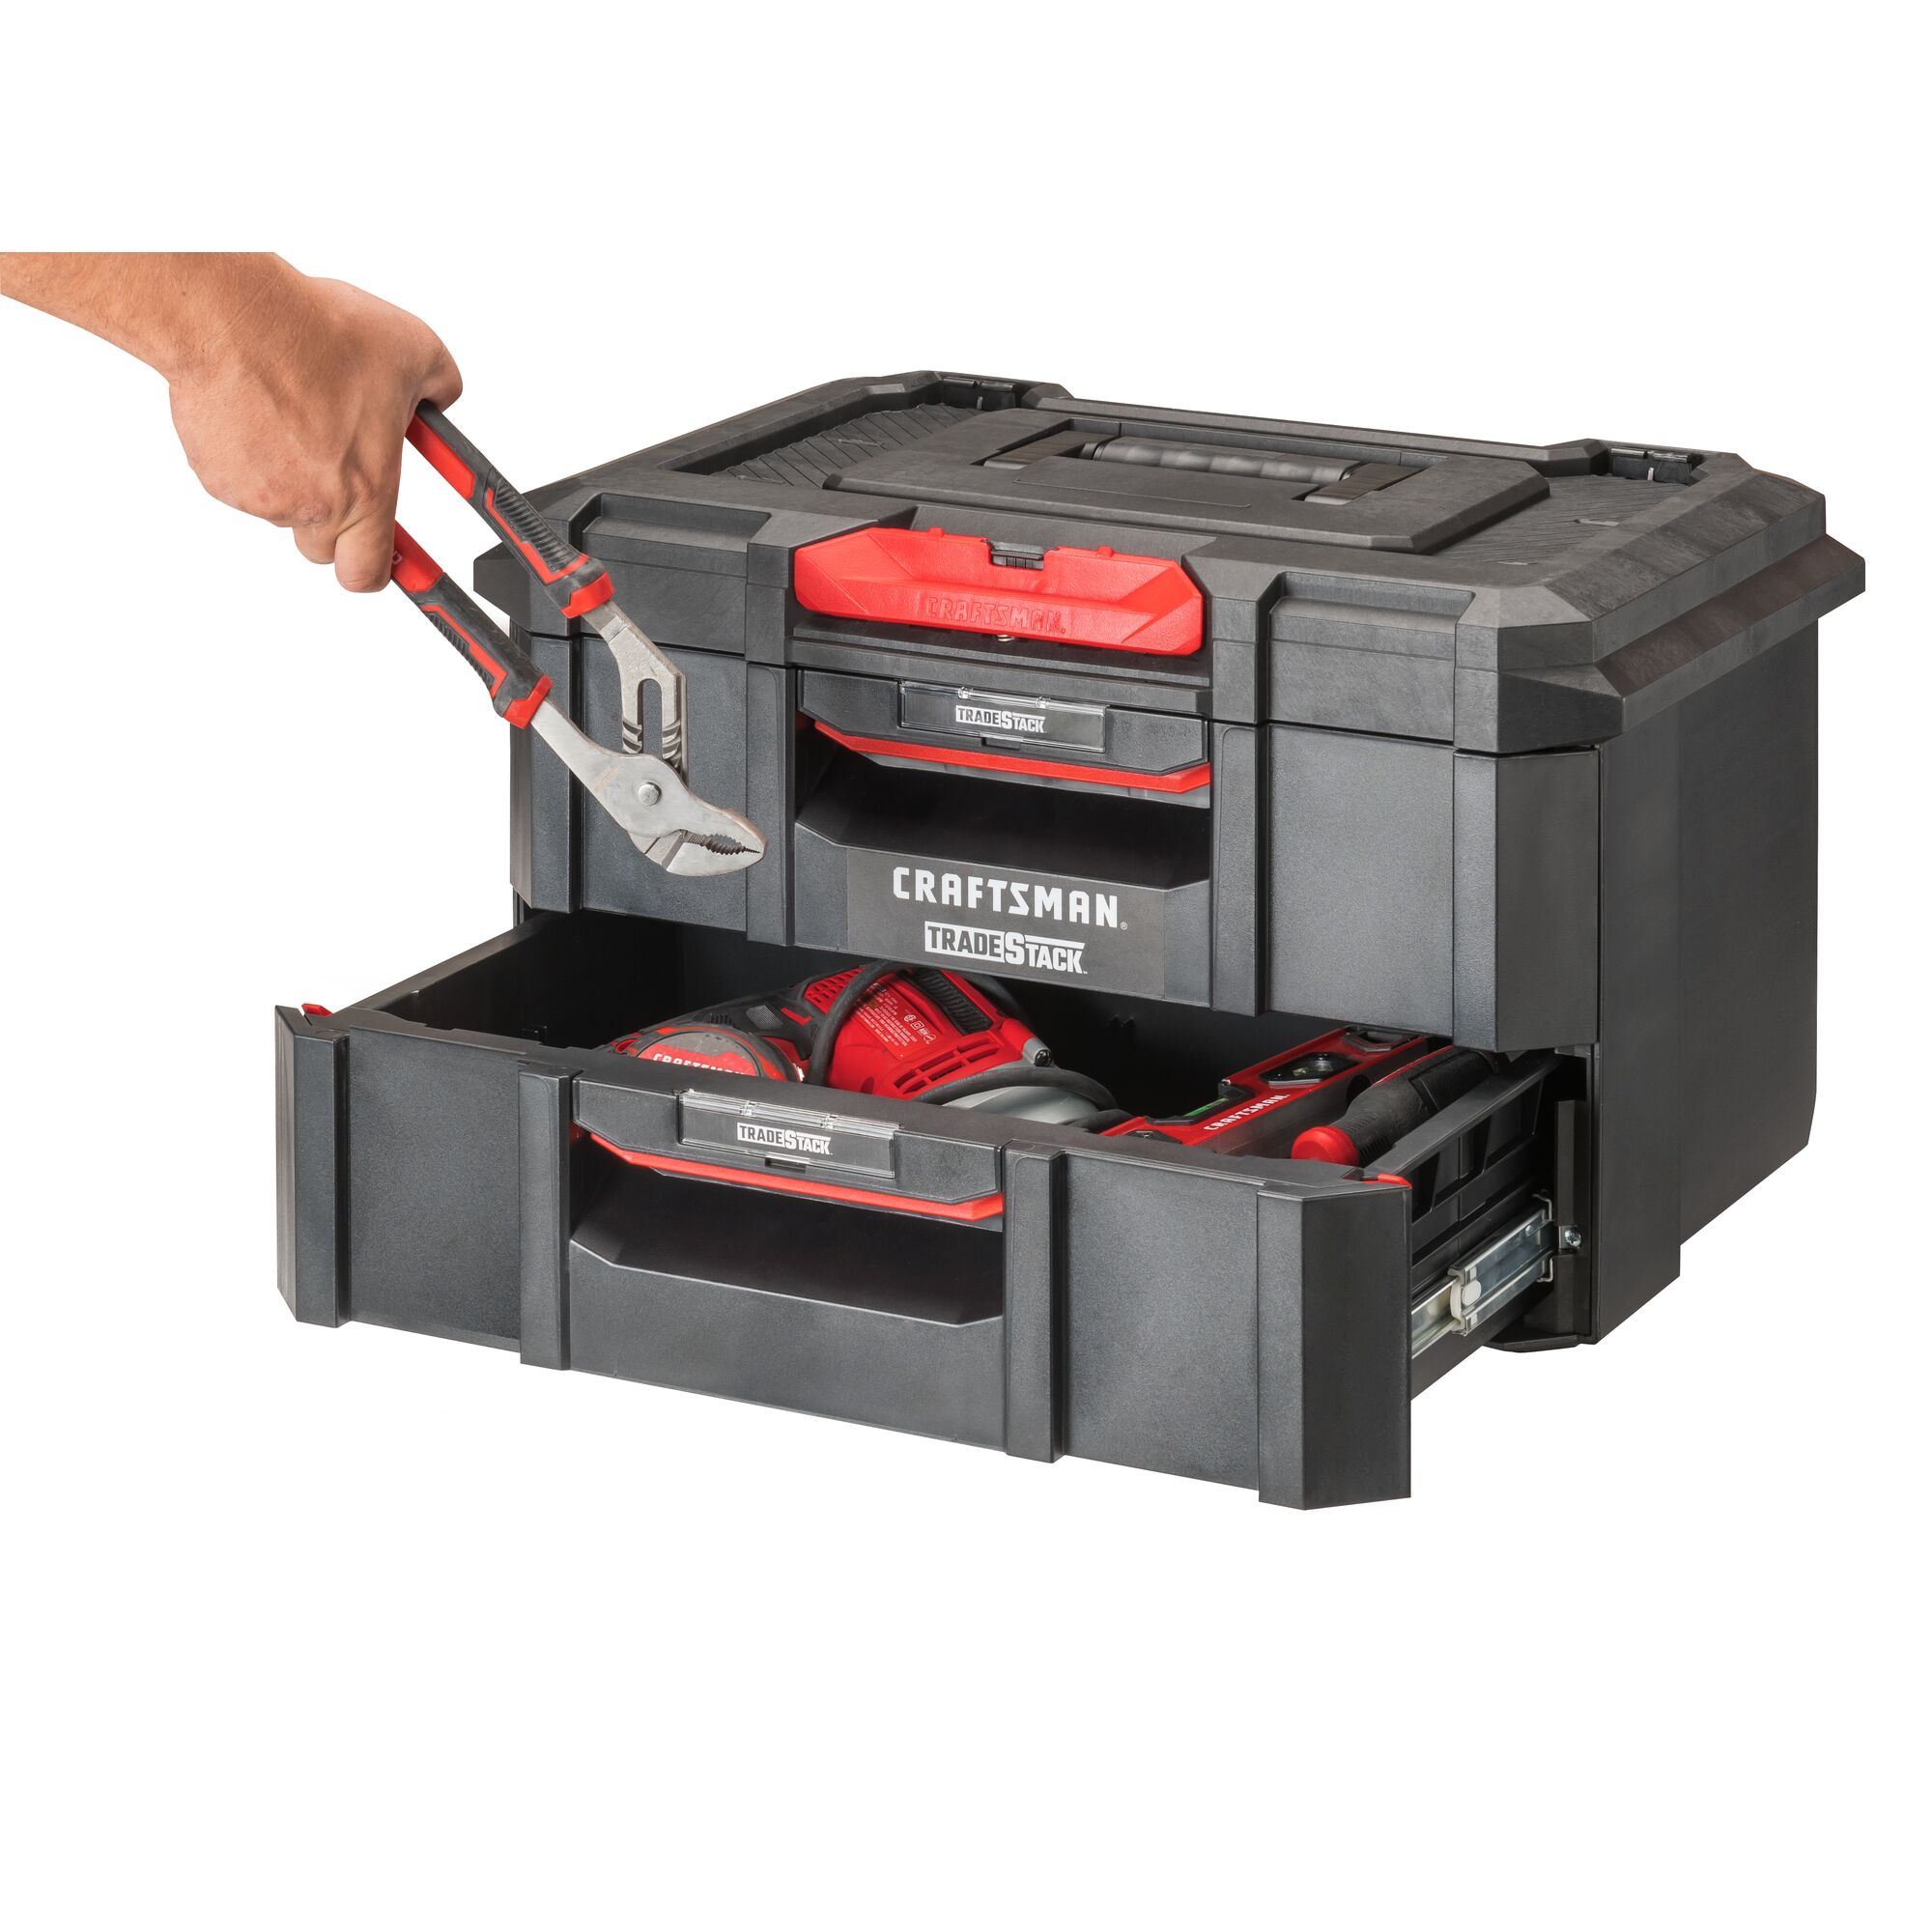 CRAFTSMAN TRADESTACK 2-Drawer Unit at three-quarter turn with hand placing CRAFTSMAN adjustable pliers into opened bottom drawer